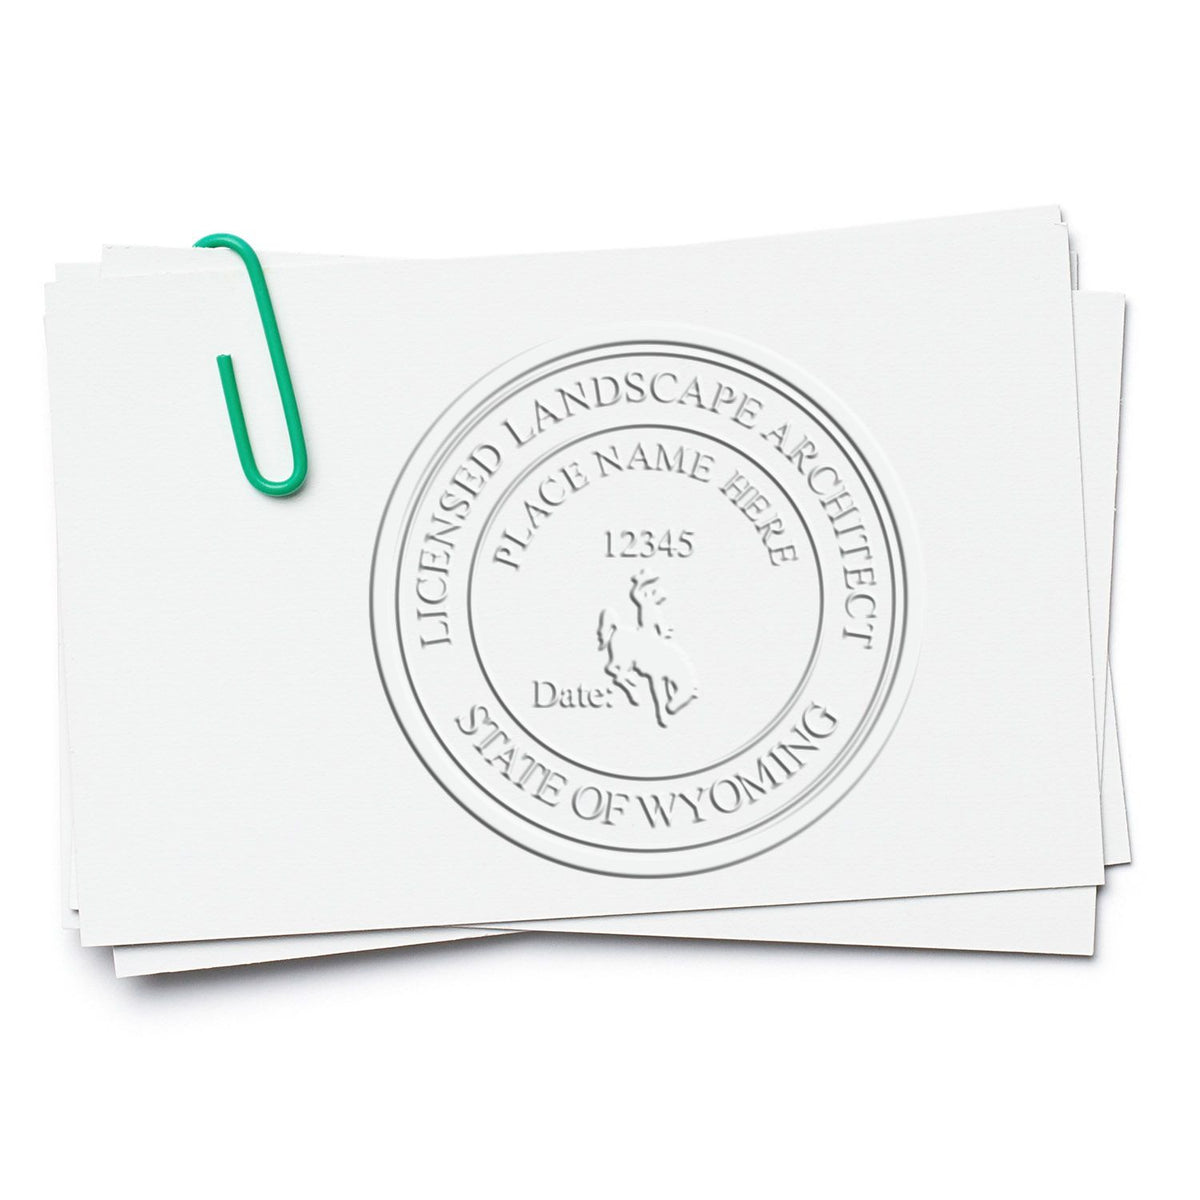 An alternative view of the Gift Wyoming Landscape Architect Seal stamped on a sheet of paper showing the image in use